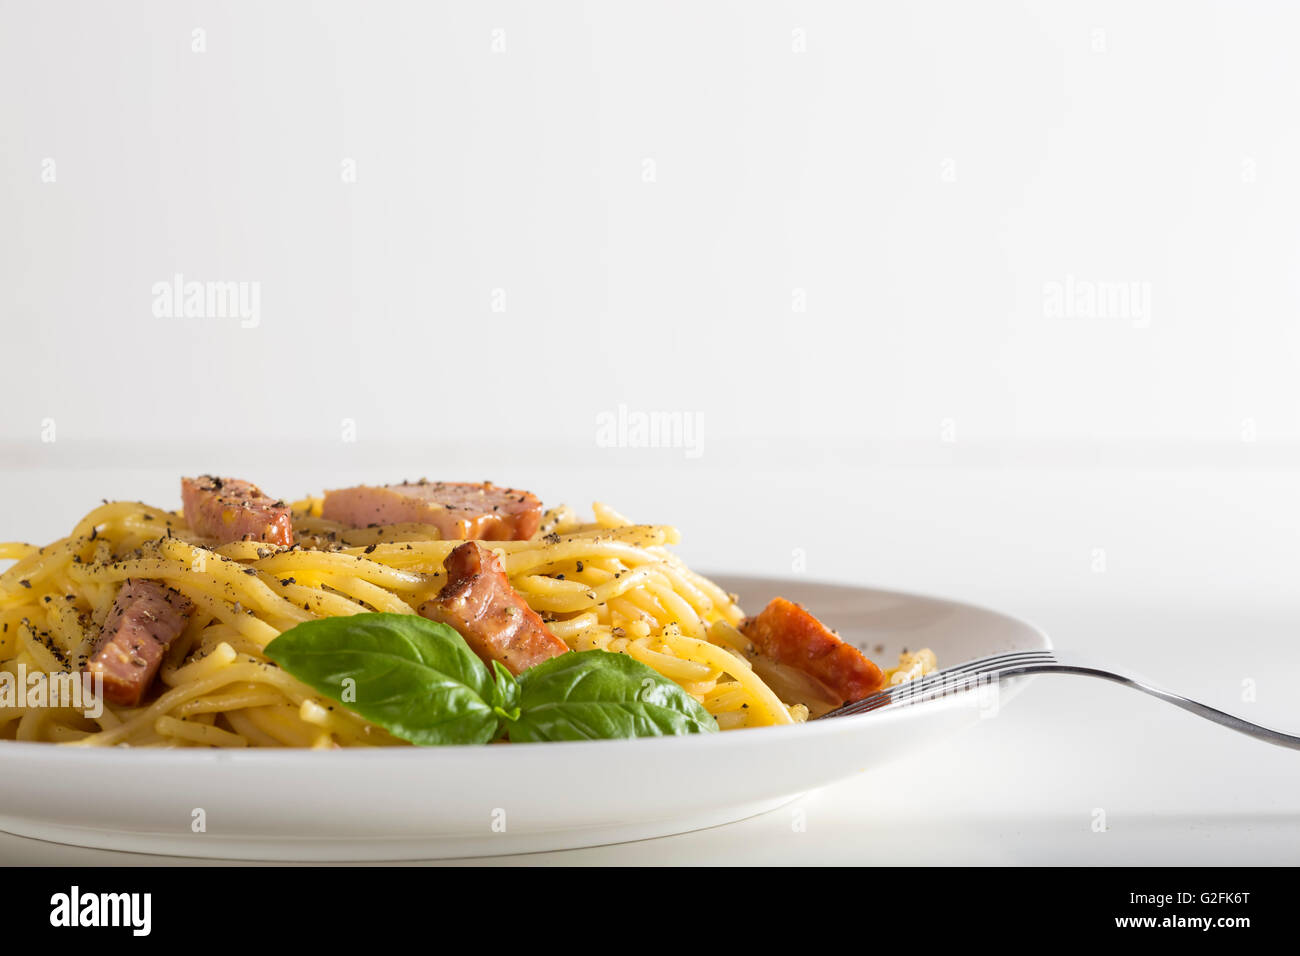 Spaghetti carbonara on white plate with fork and copy space Stock Photo